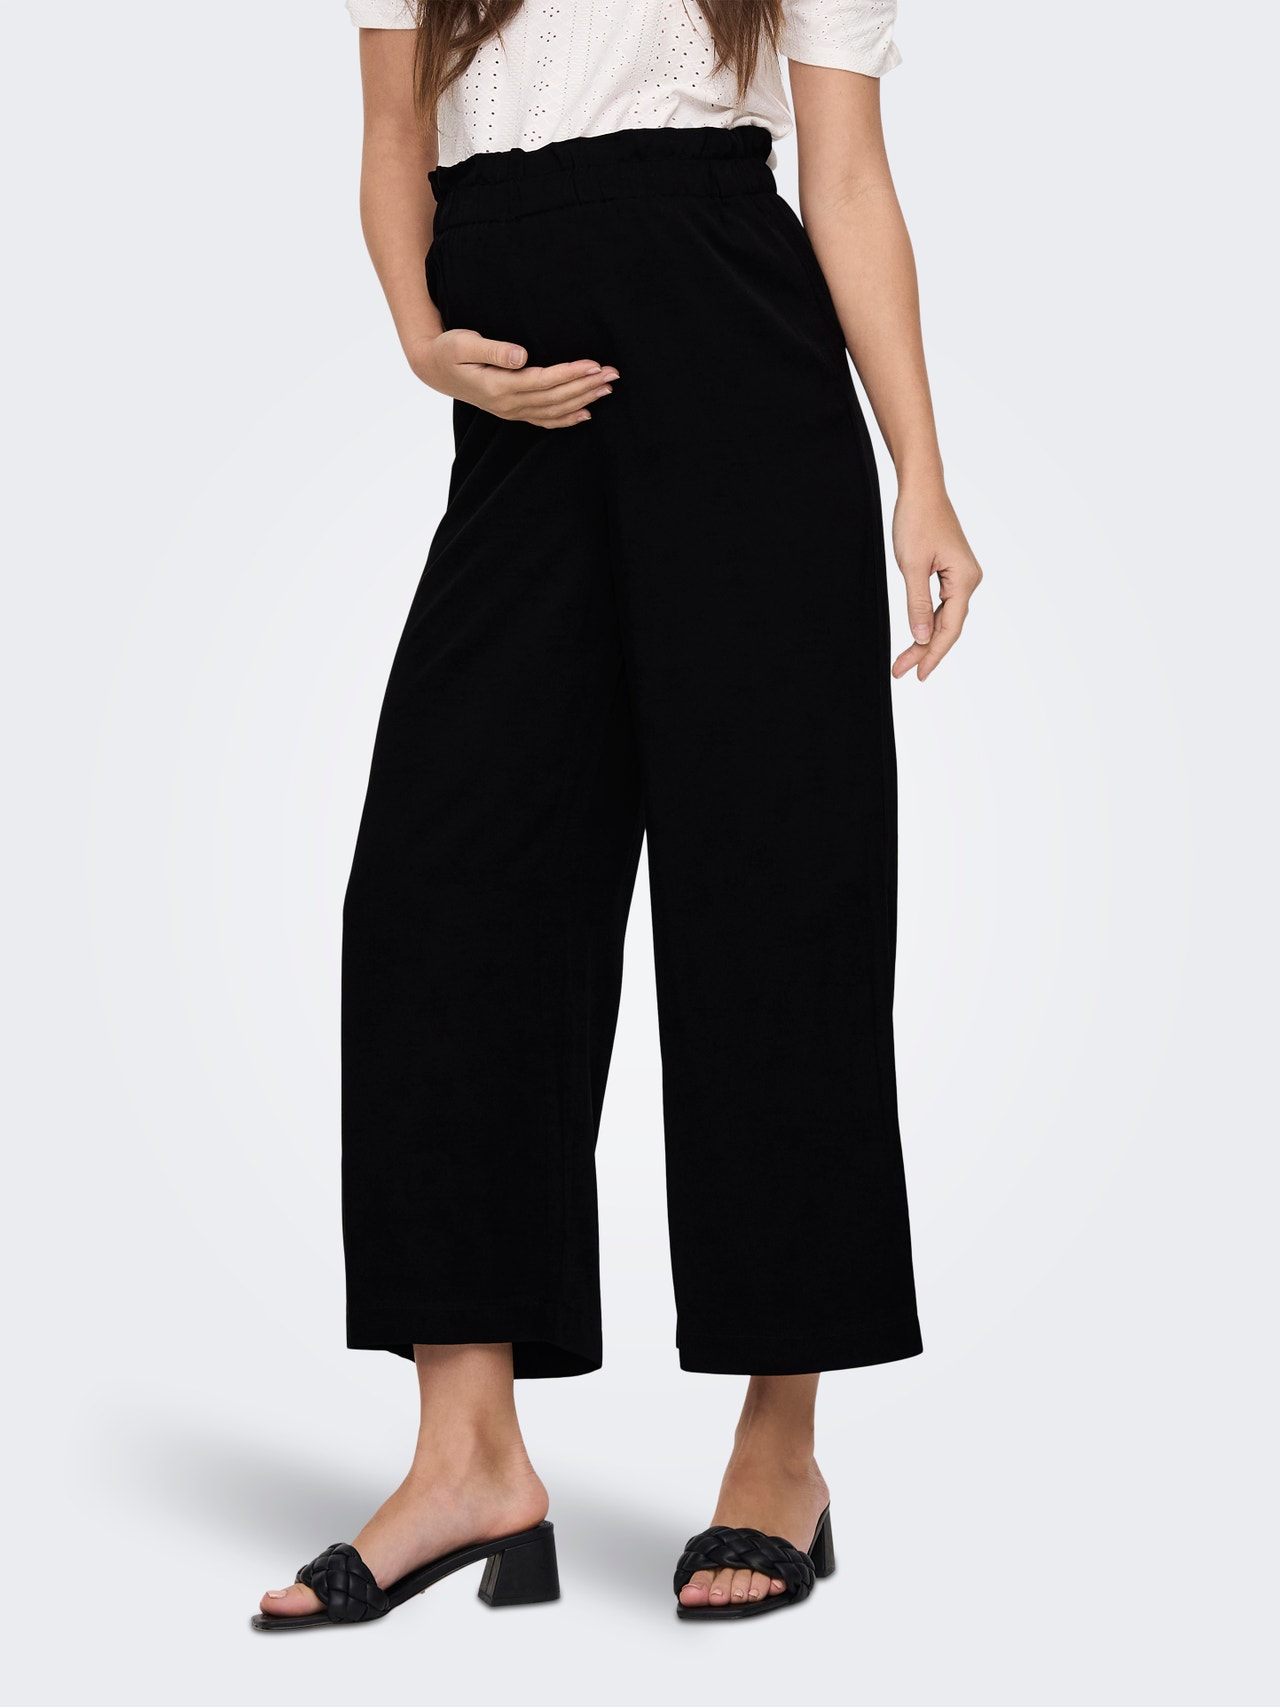 Loose Fit High waist Maternity Trousers, Black